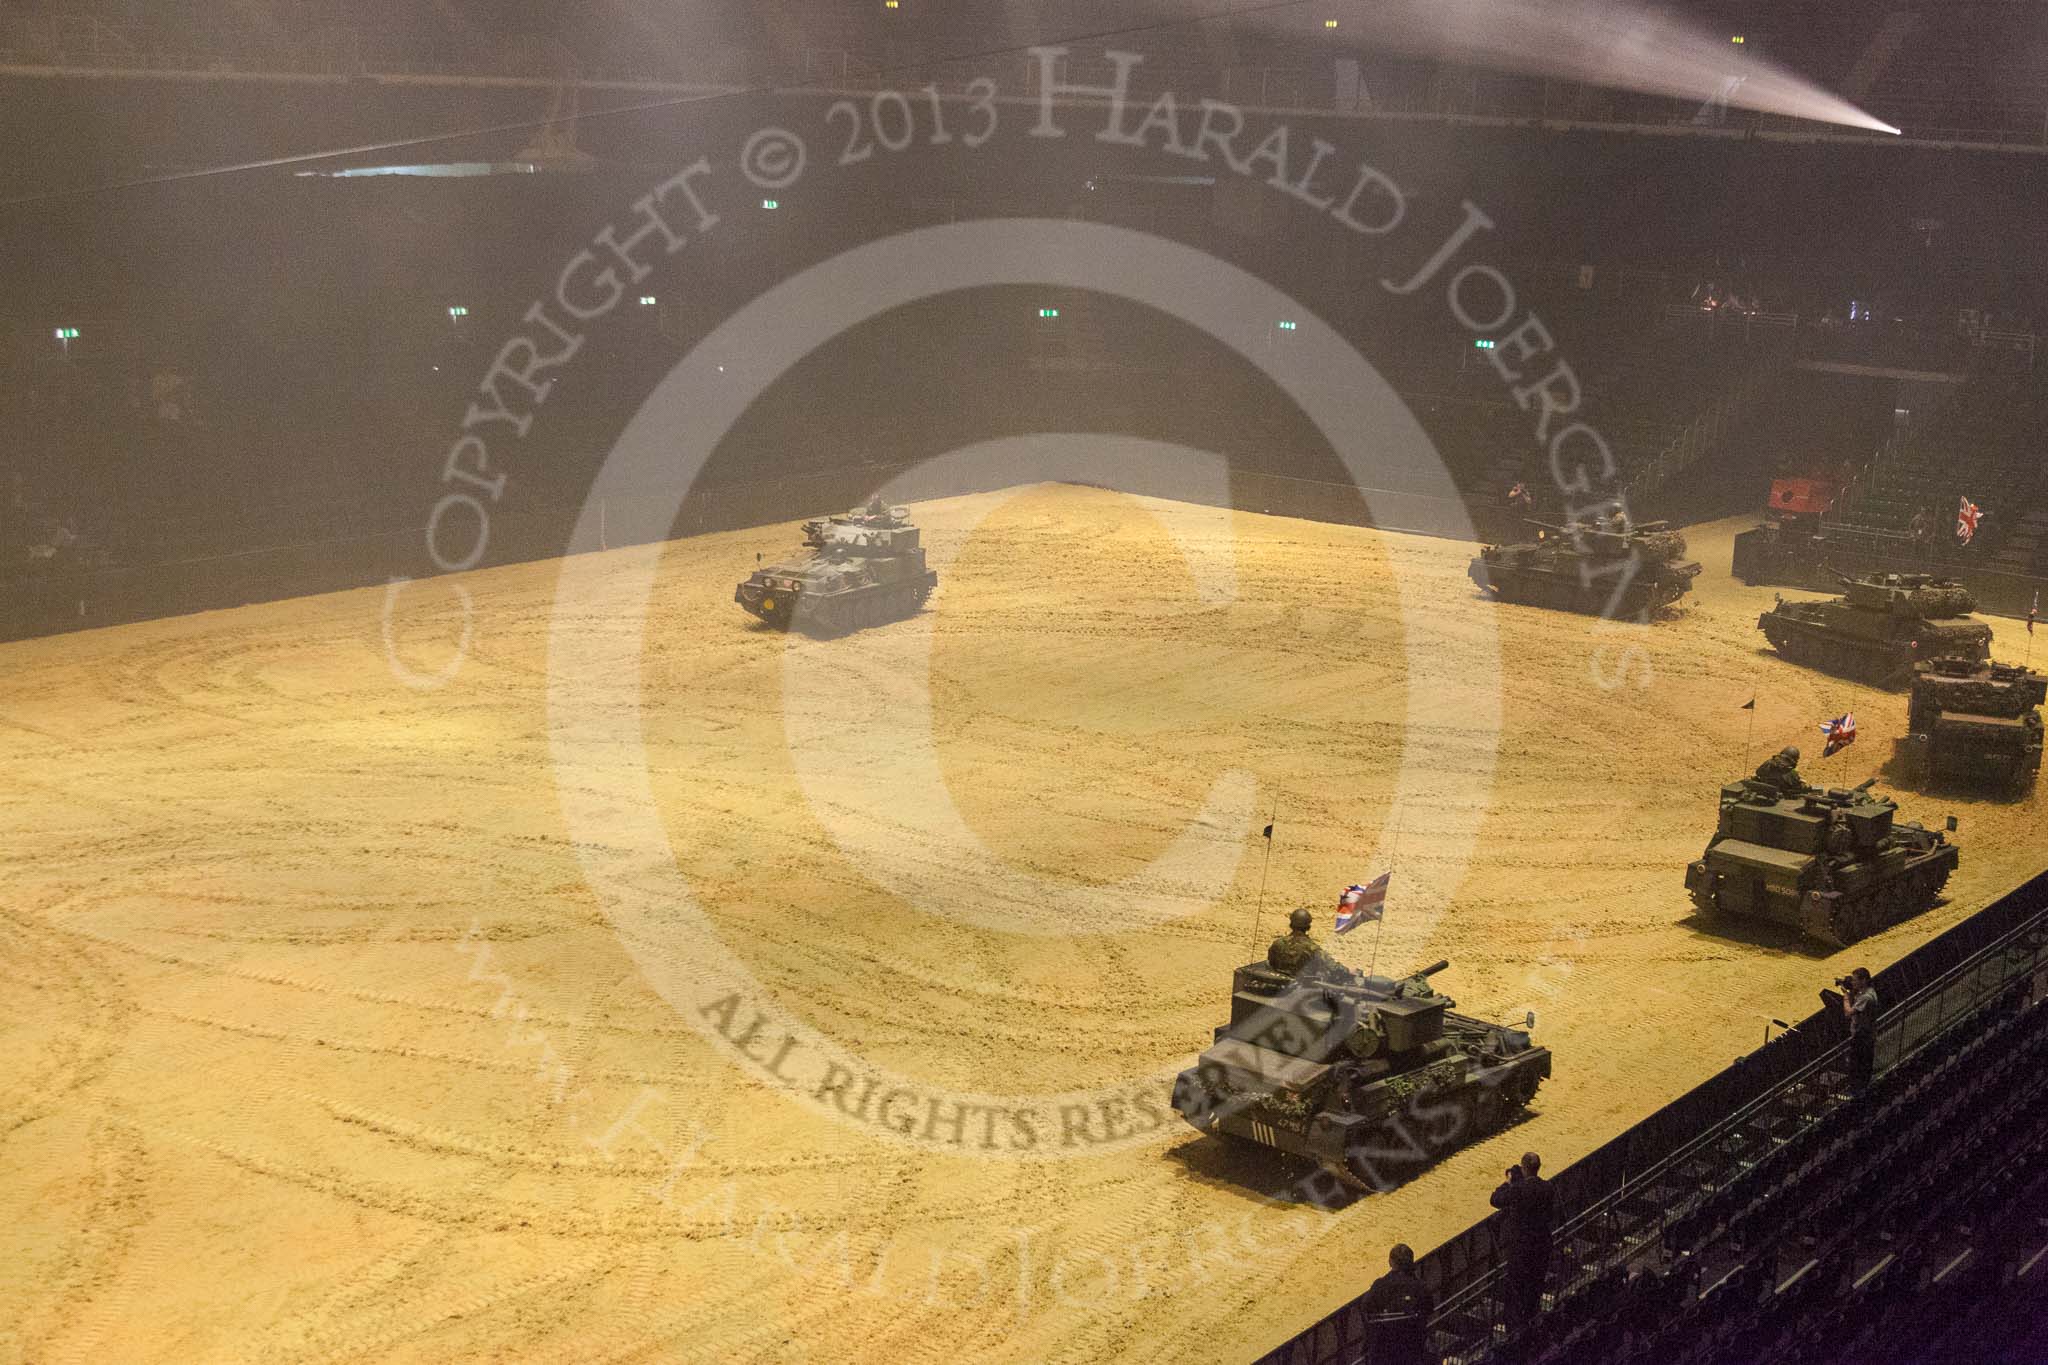 British Military Tournament 2013.
Earls Court,
London SW5,

United Kingdom,
on 06 December 2013 at 16:23, image #403